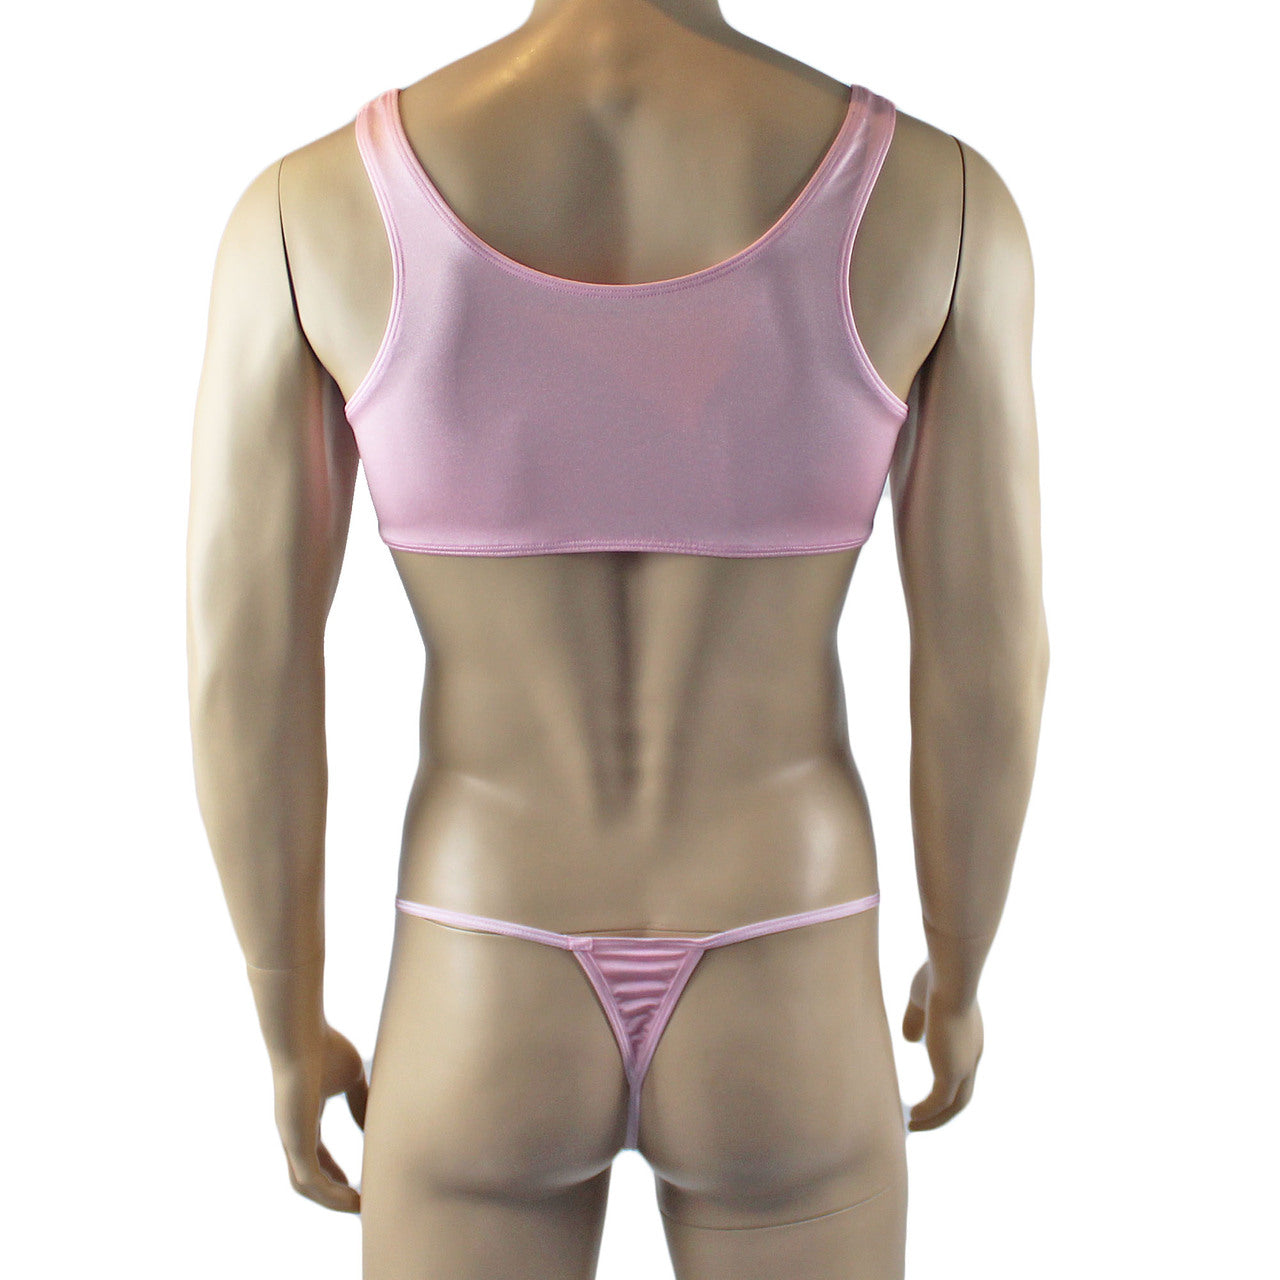 Male Lingerie Bra Top with V Lace front and Pouch G string (light pink plus other colours)